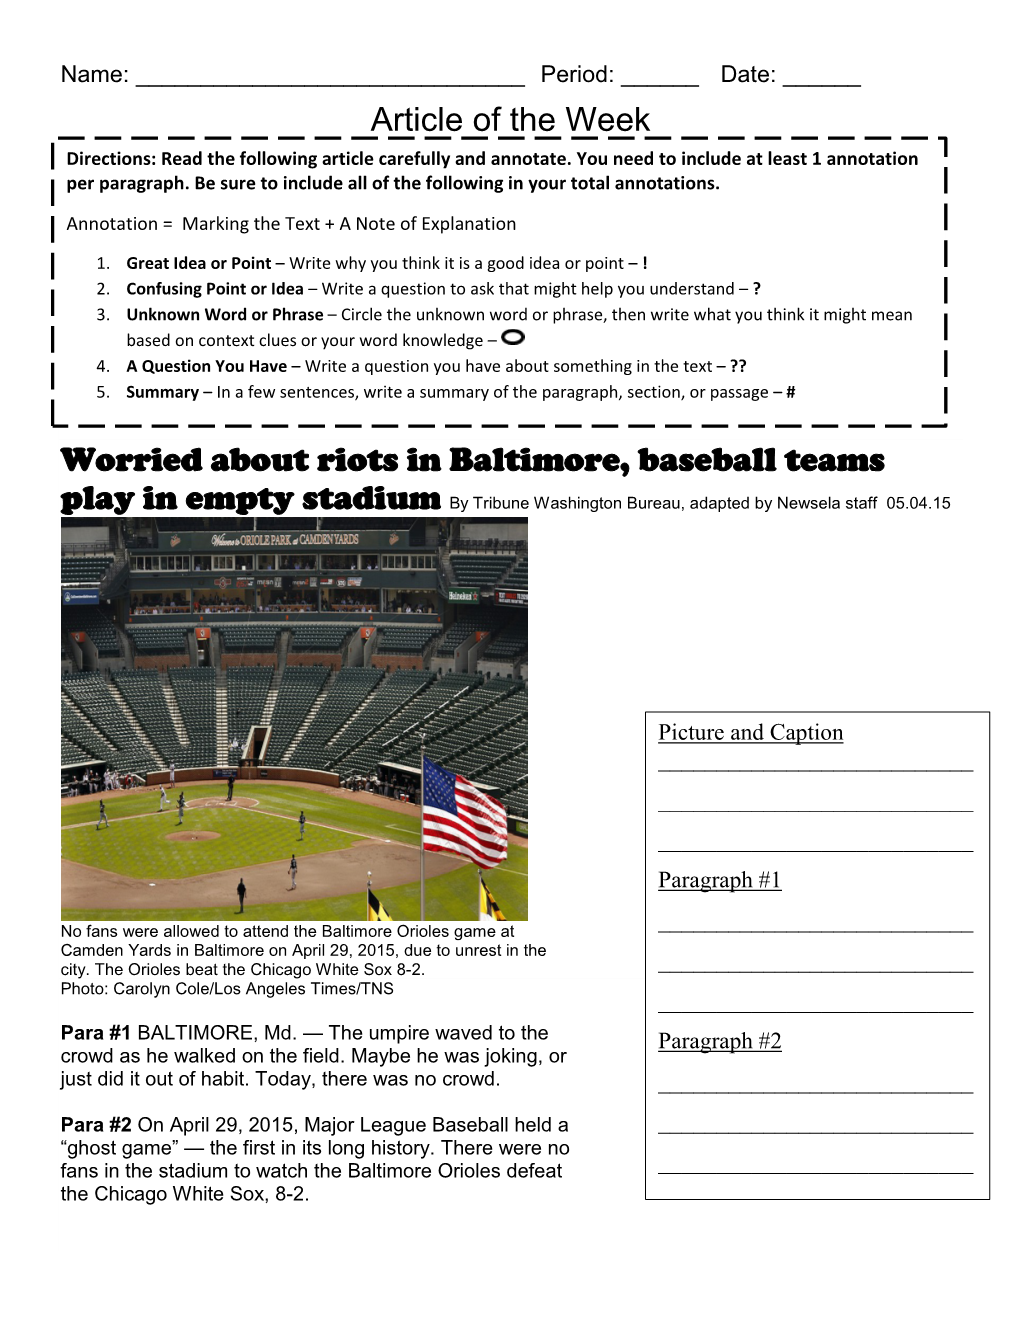 Article of the Week Worried About Riots in Baltimore, Baseball Teams